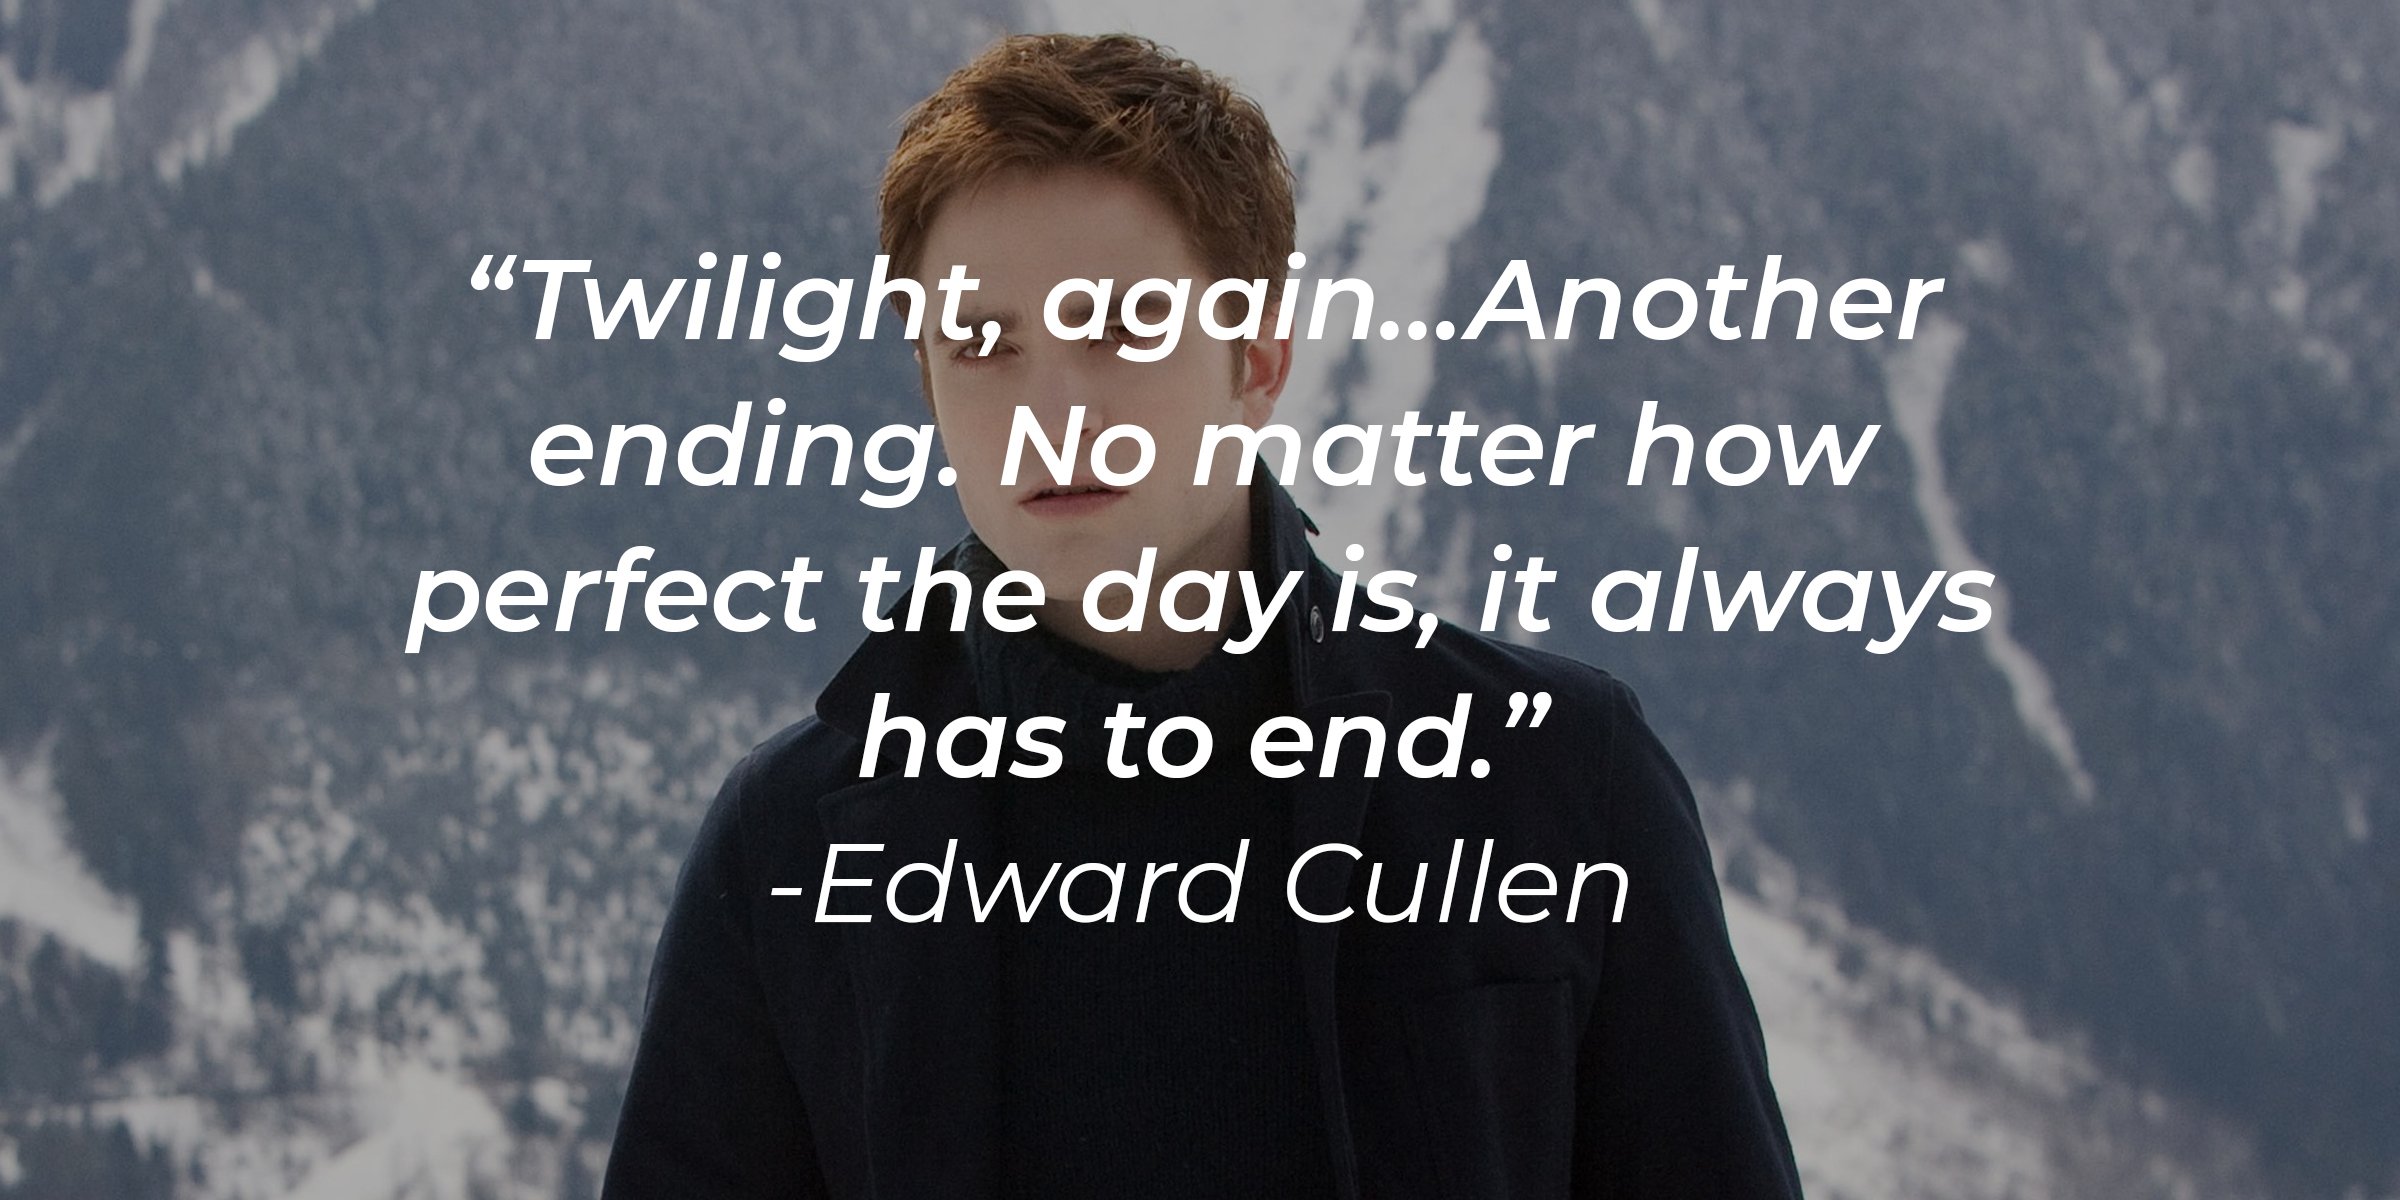 An image of Edward Cullen with his quote: “Twilight, again…Another ending. No matter how perfect the day is, it always has to end.” | Source: Facebook.com/twilight